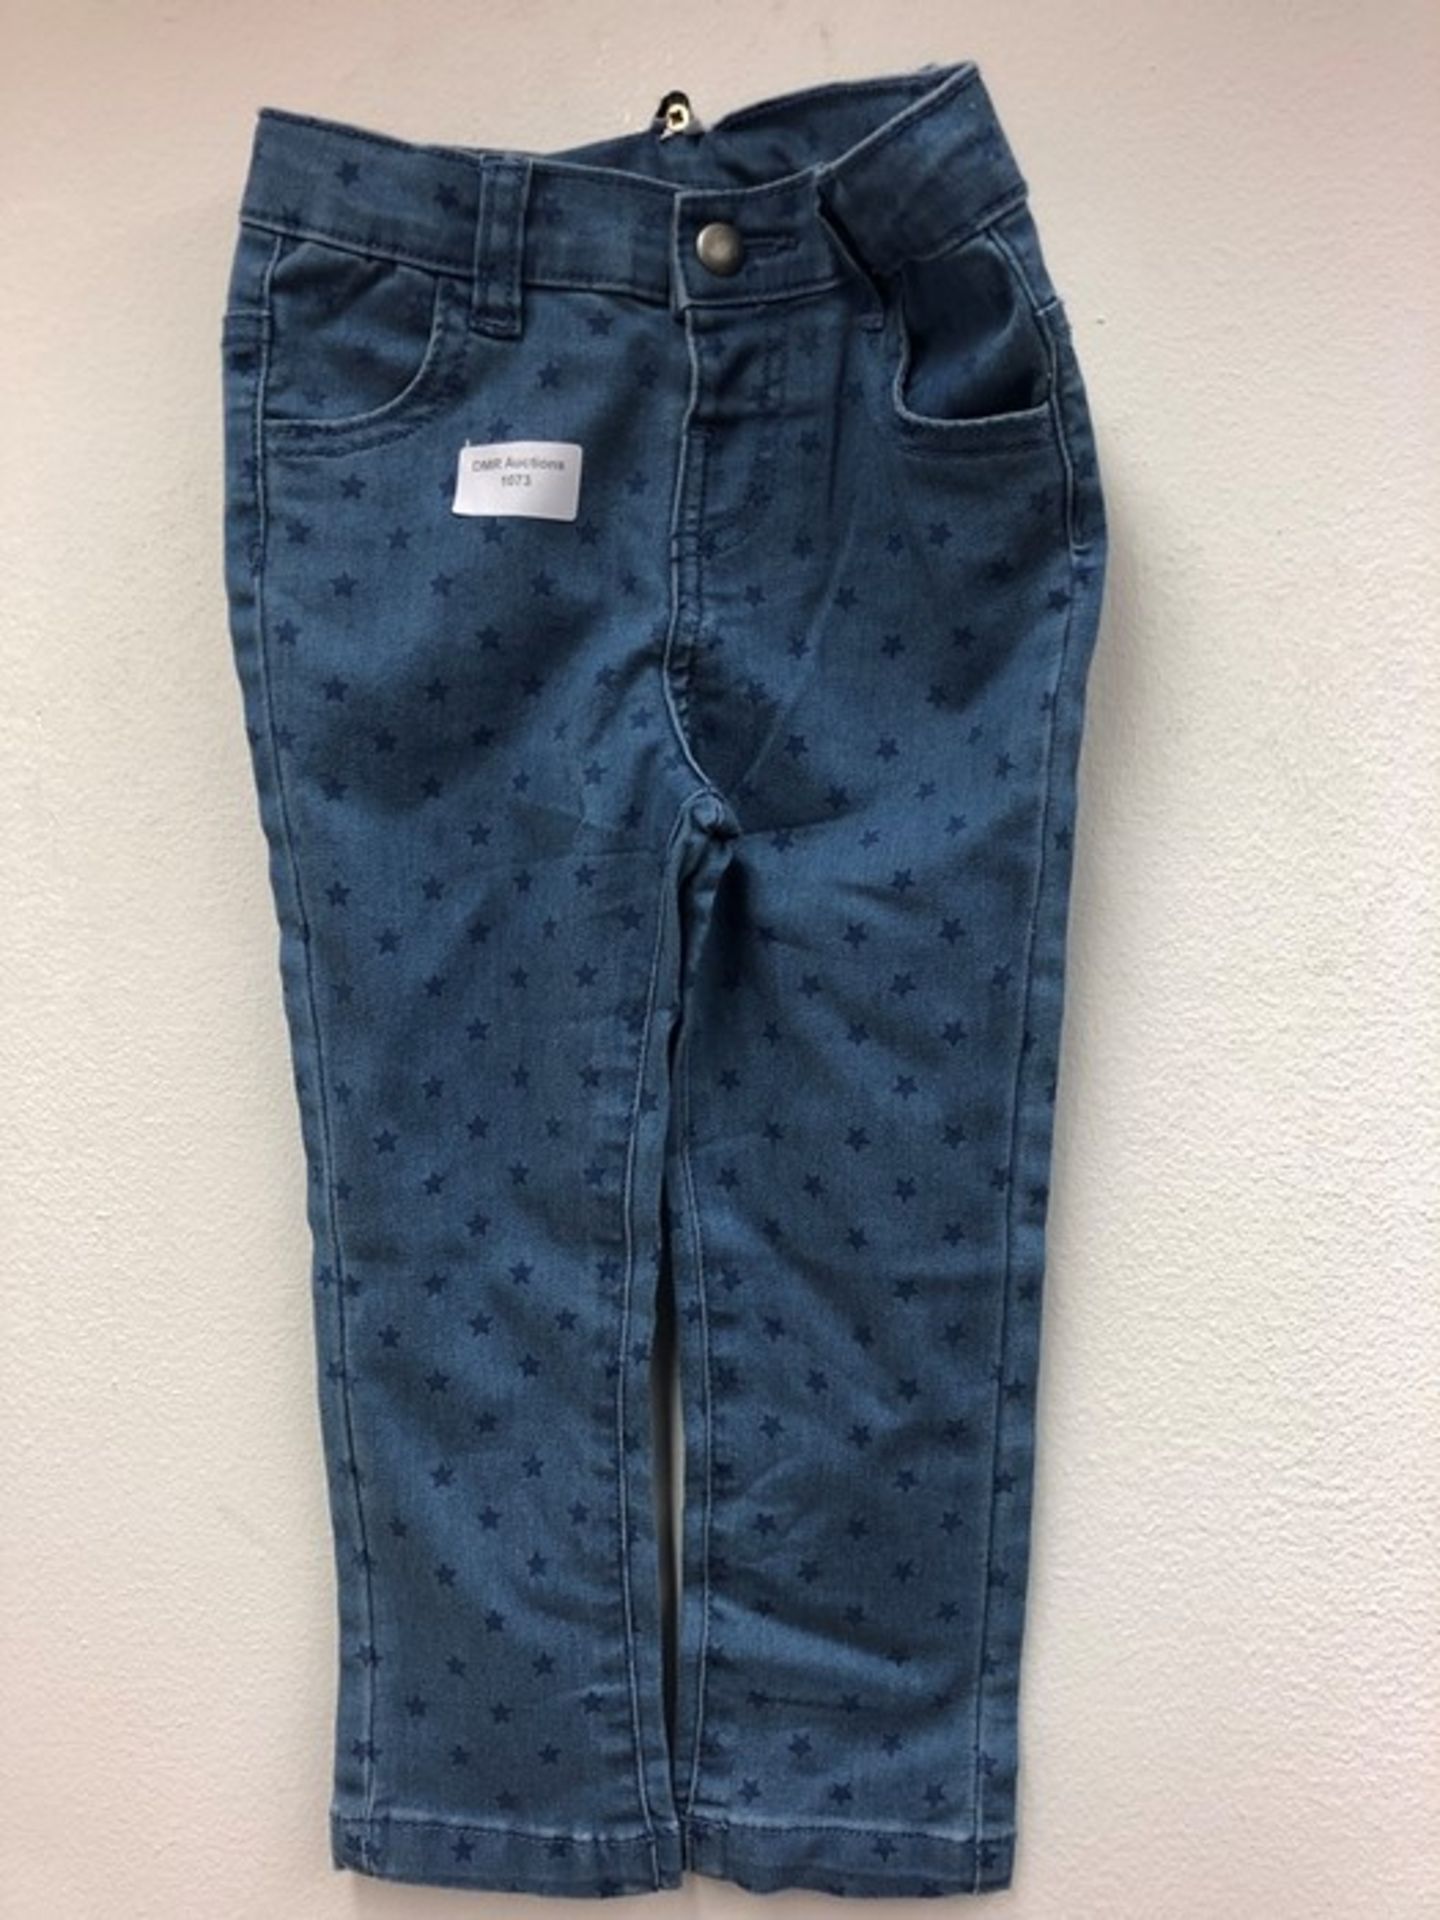 1 AS NEW LA REDOUTE GIRLS SKINNY JEANS / SIZE 3YRS